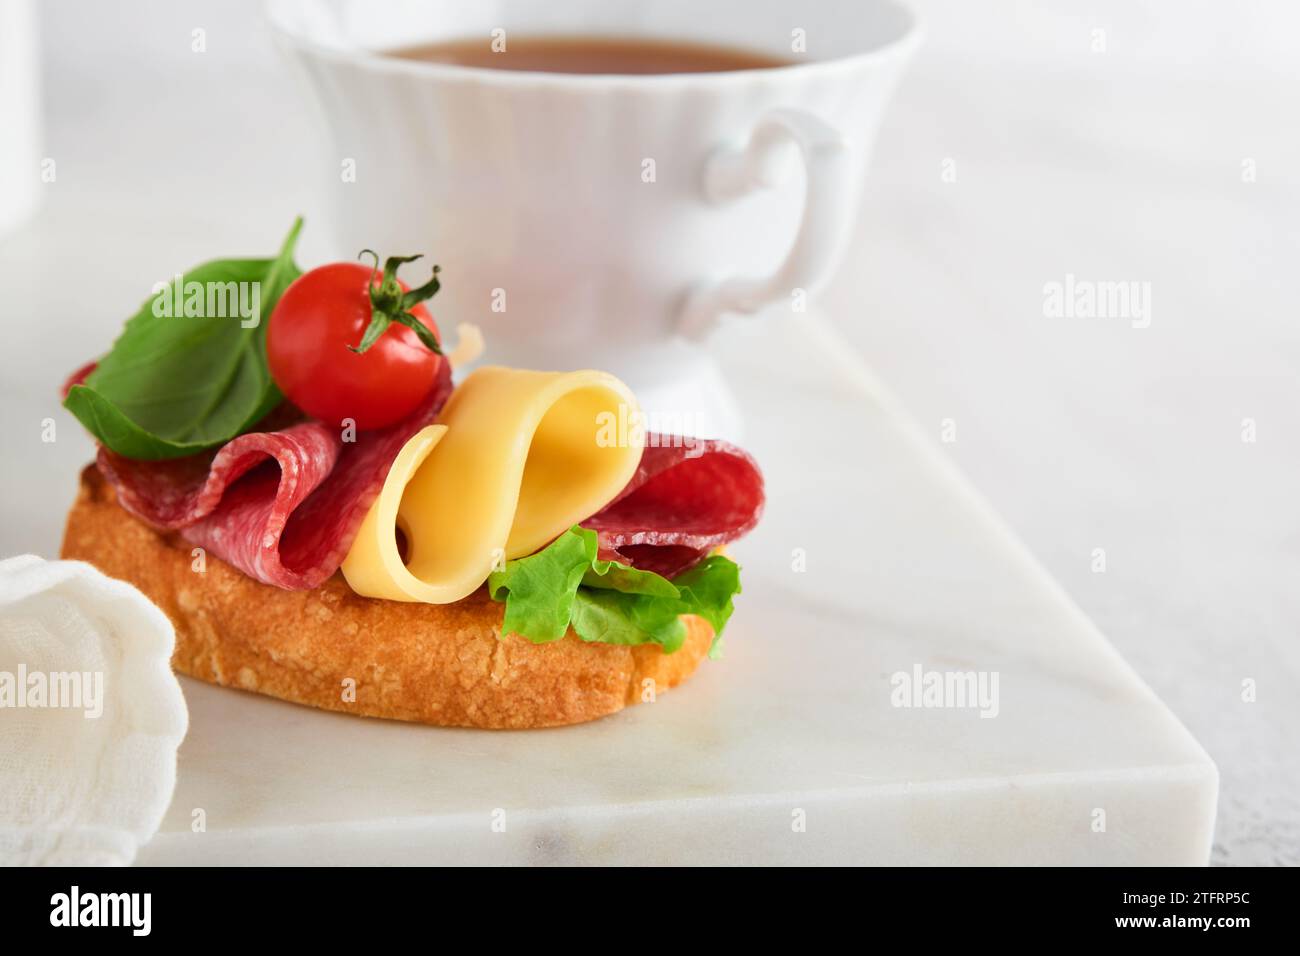 Salami sandwich. Delicious toasted sandwiches with slice salami, cheddar cheese lettuce and tomatoes cherry on white marble background. Restaurant men Stock Photo